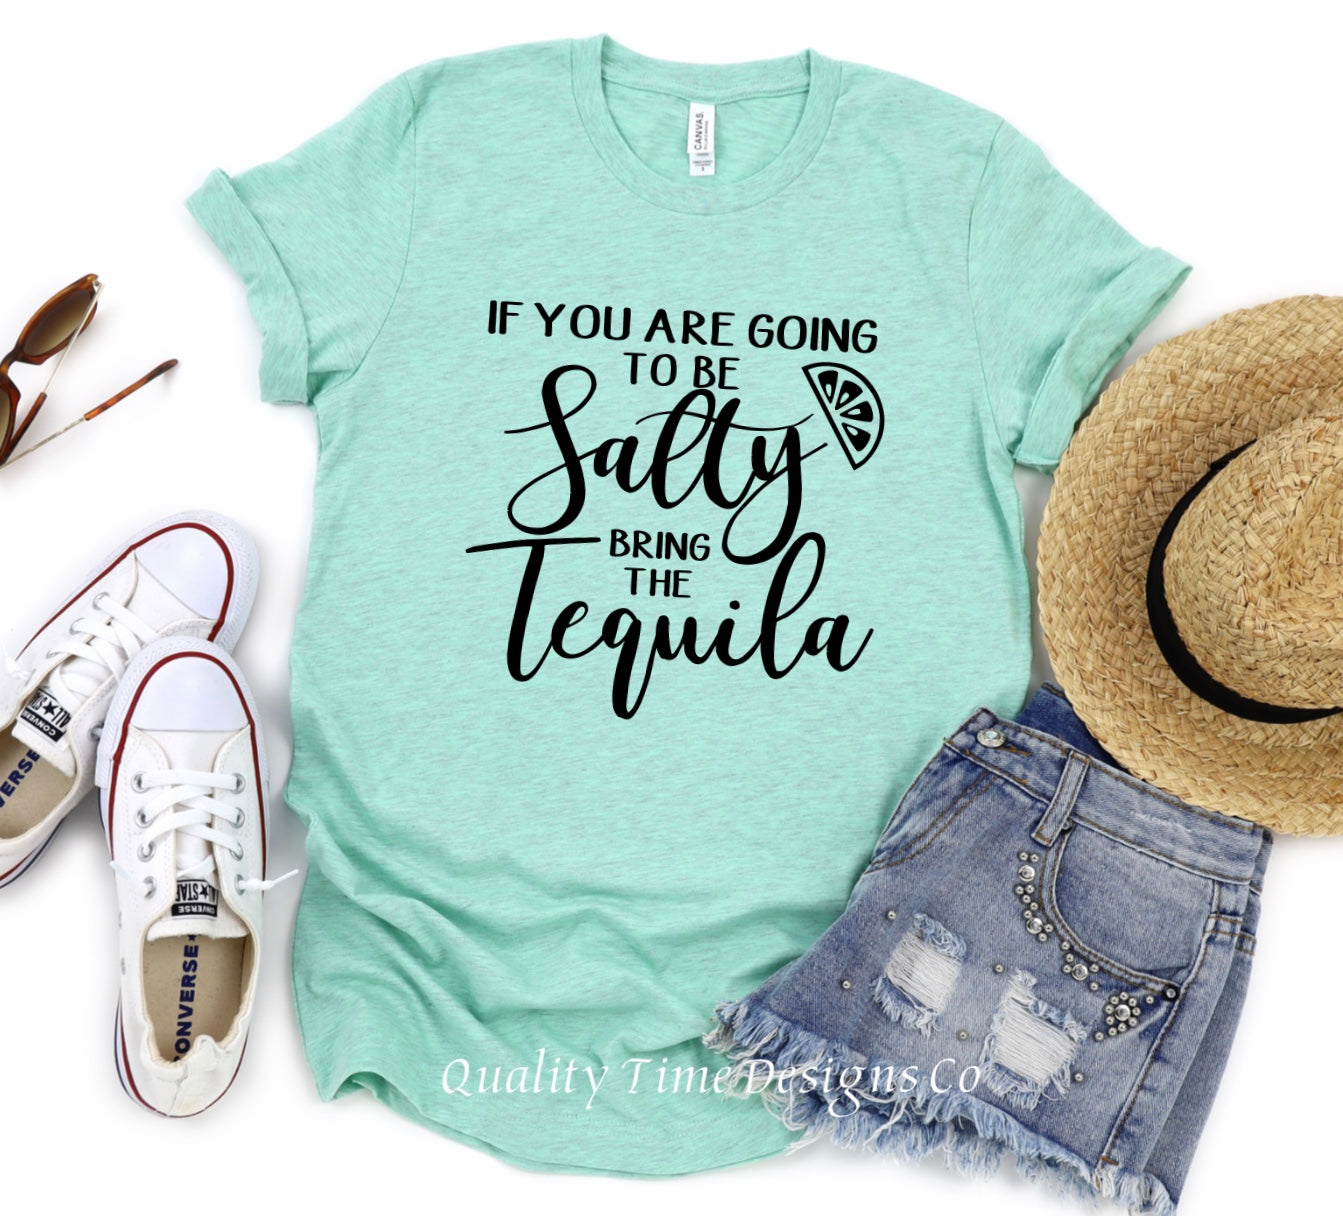 If you are going to be salty bring the tequila t-shirt 